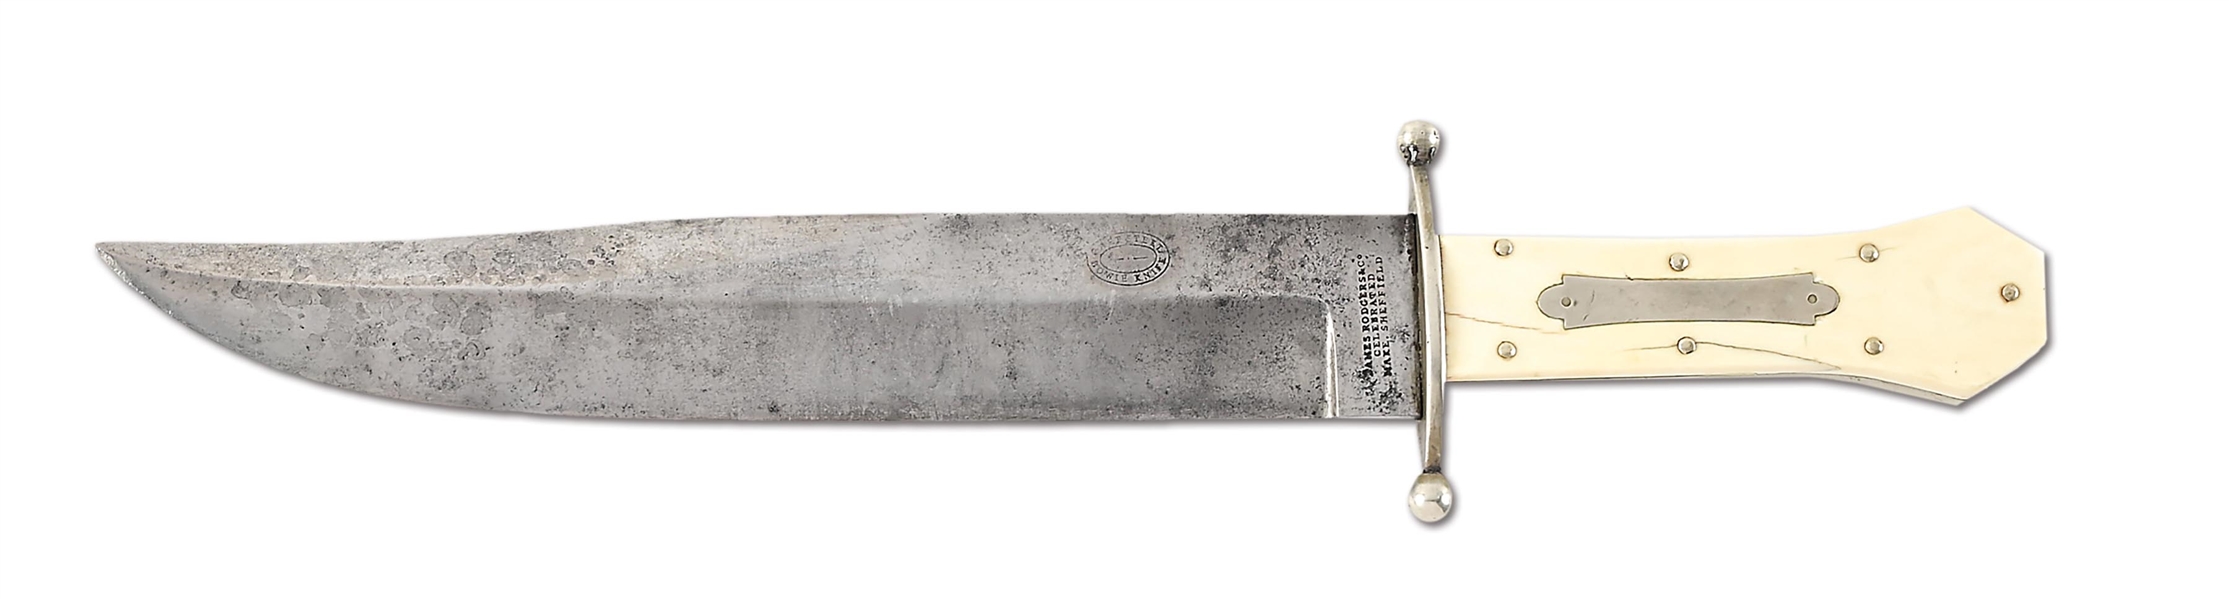 LARGE JAMES RODGERS & CO BOWIE KNIFE.